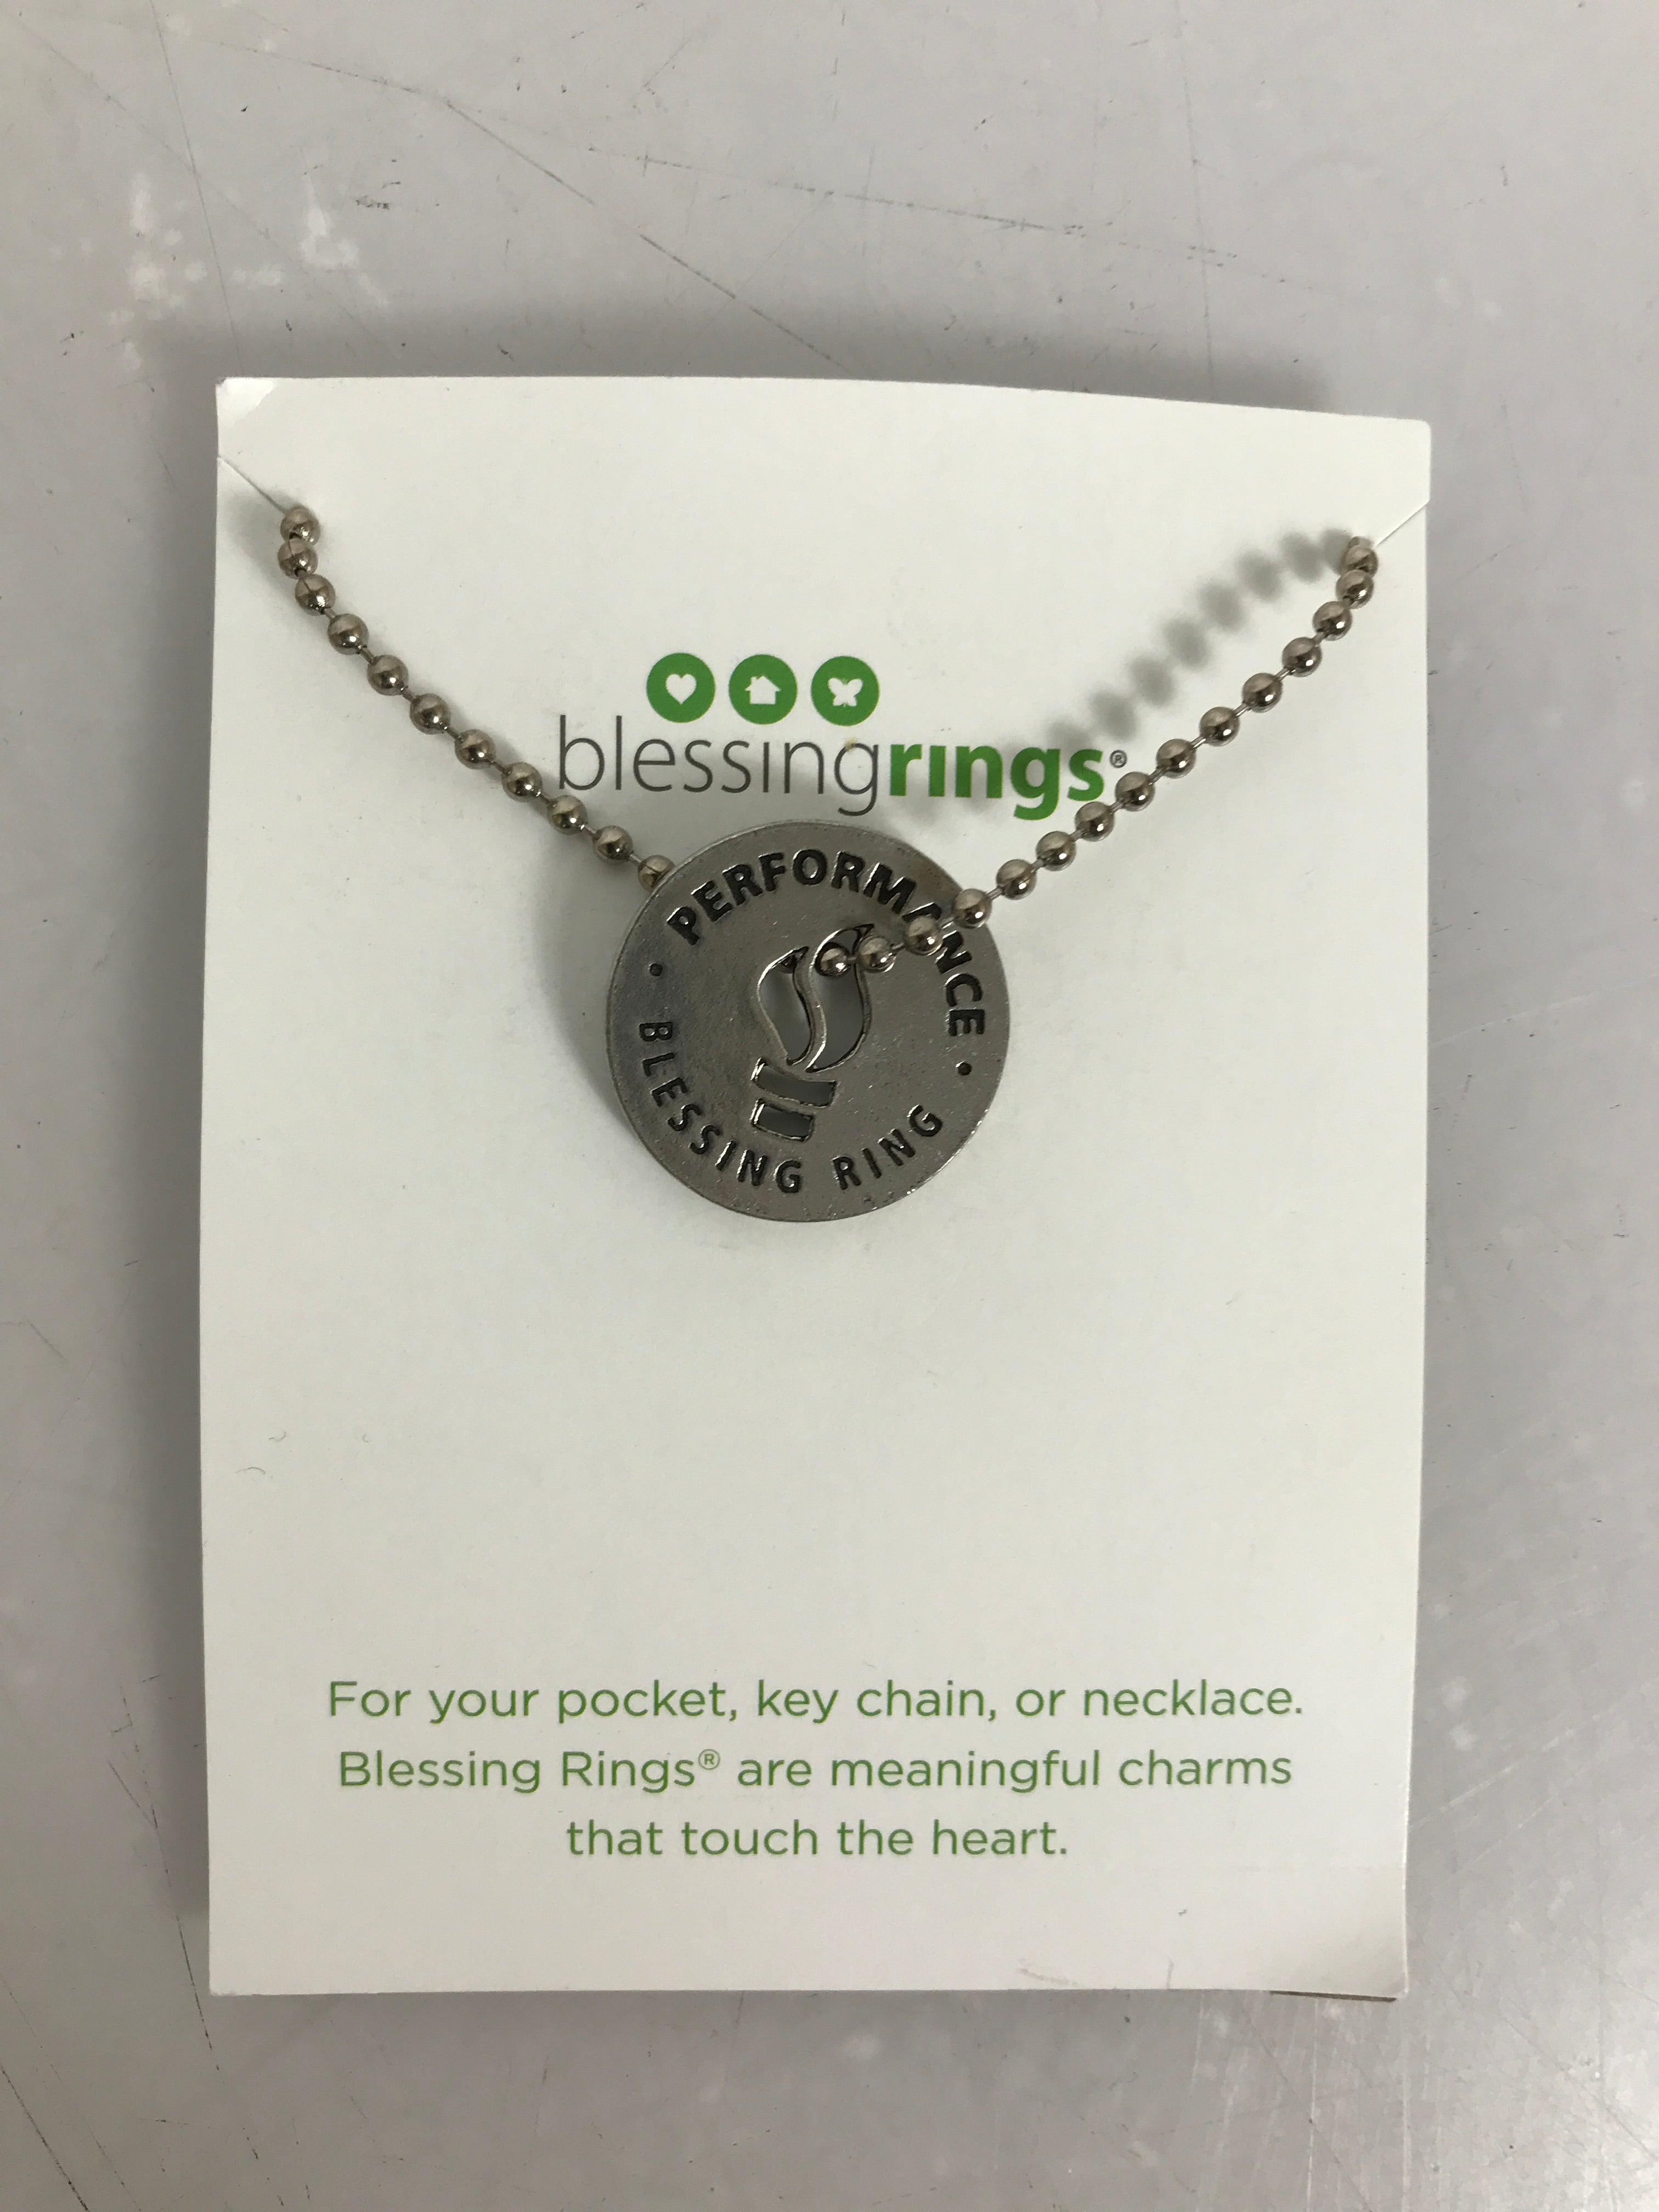 WHD BlessingRings "Performance" Necklace